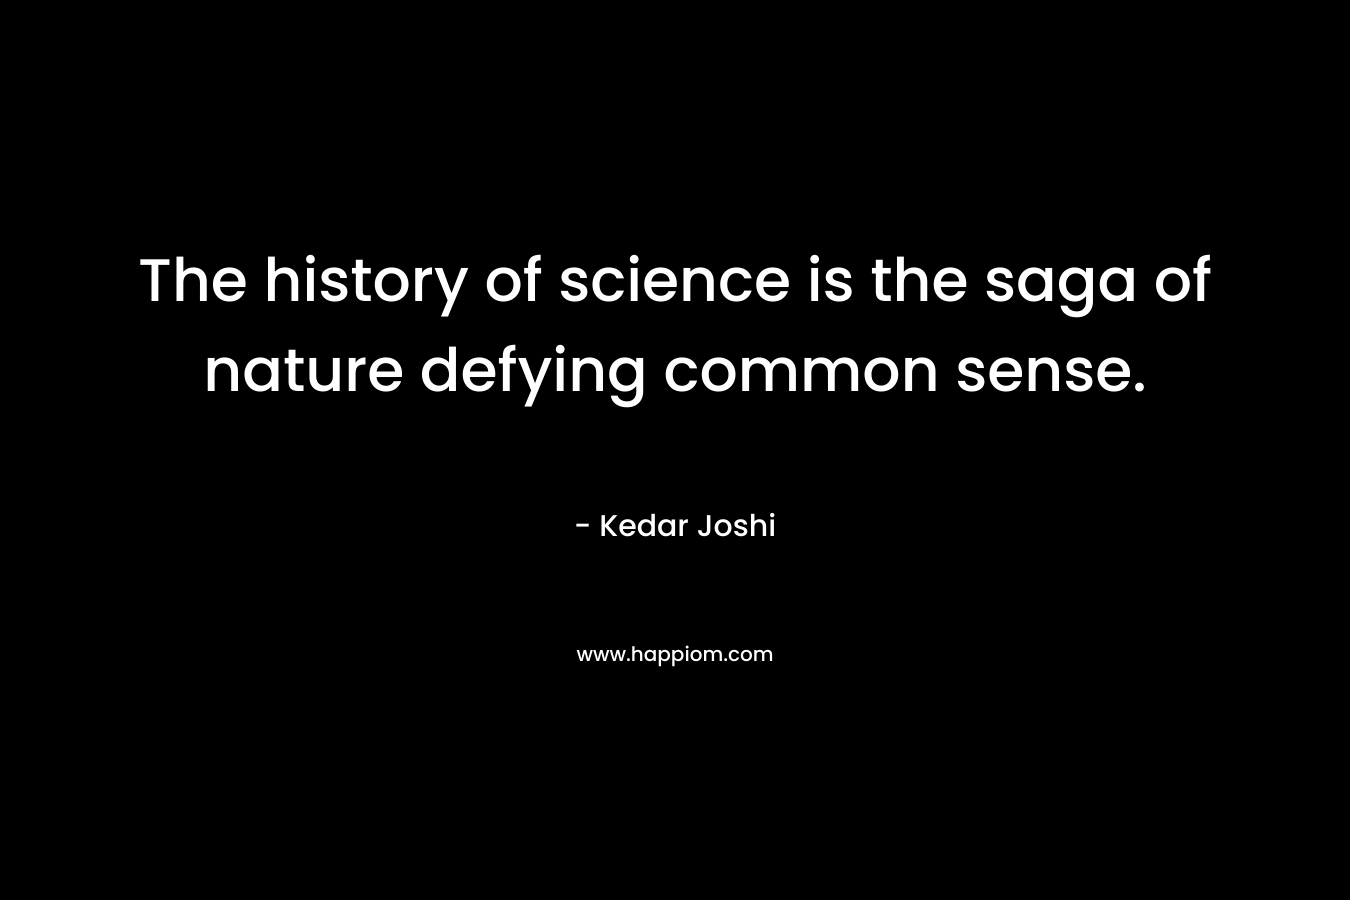 The history of science is the saga of nature defying common sense.